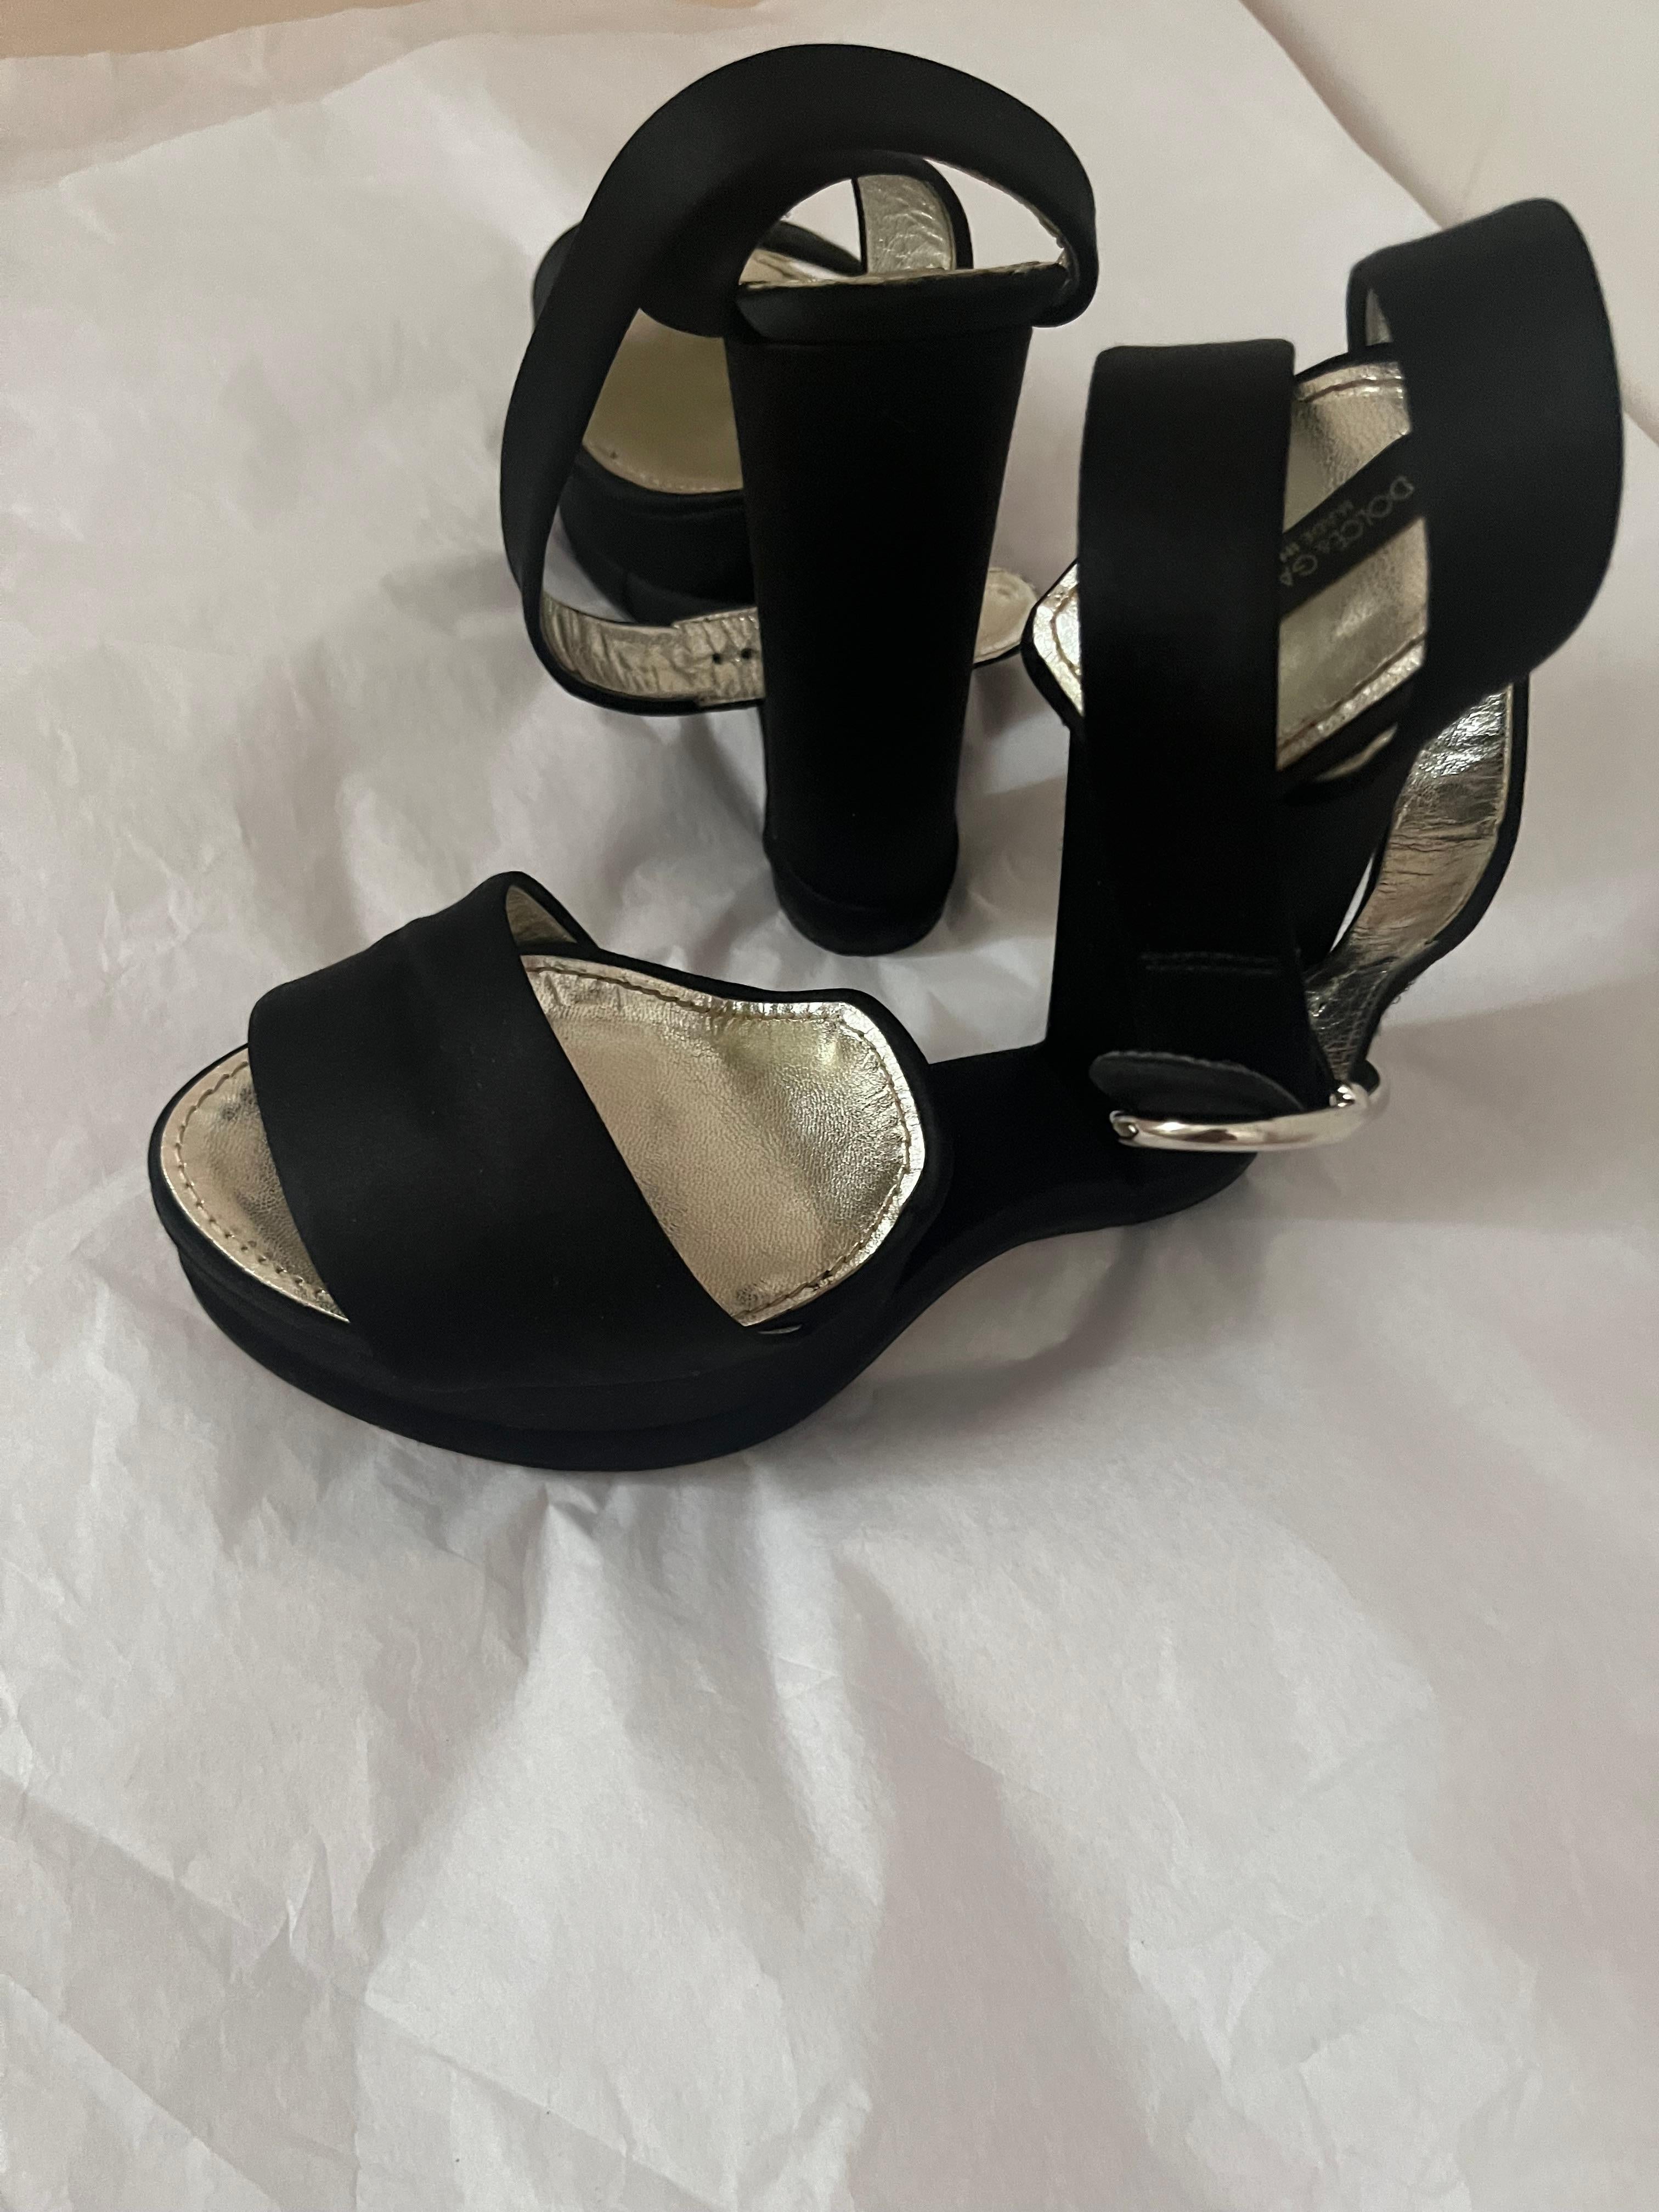 Dolce & Gabbana Black Satin Peep Toe Evening Shoes 39 In Good Condition For Sale In Port Hope, ON